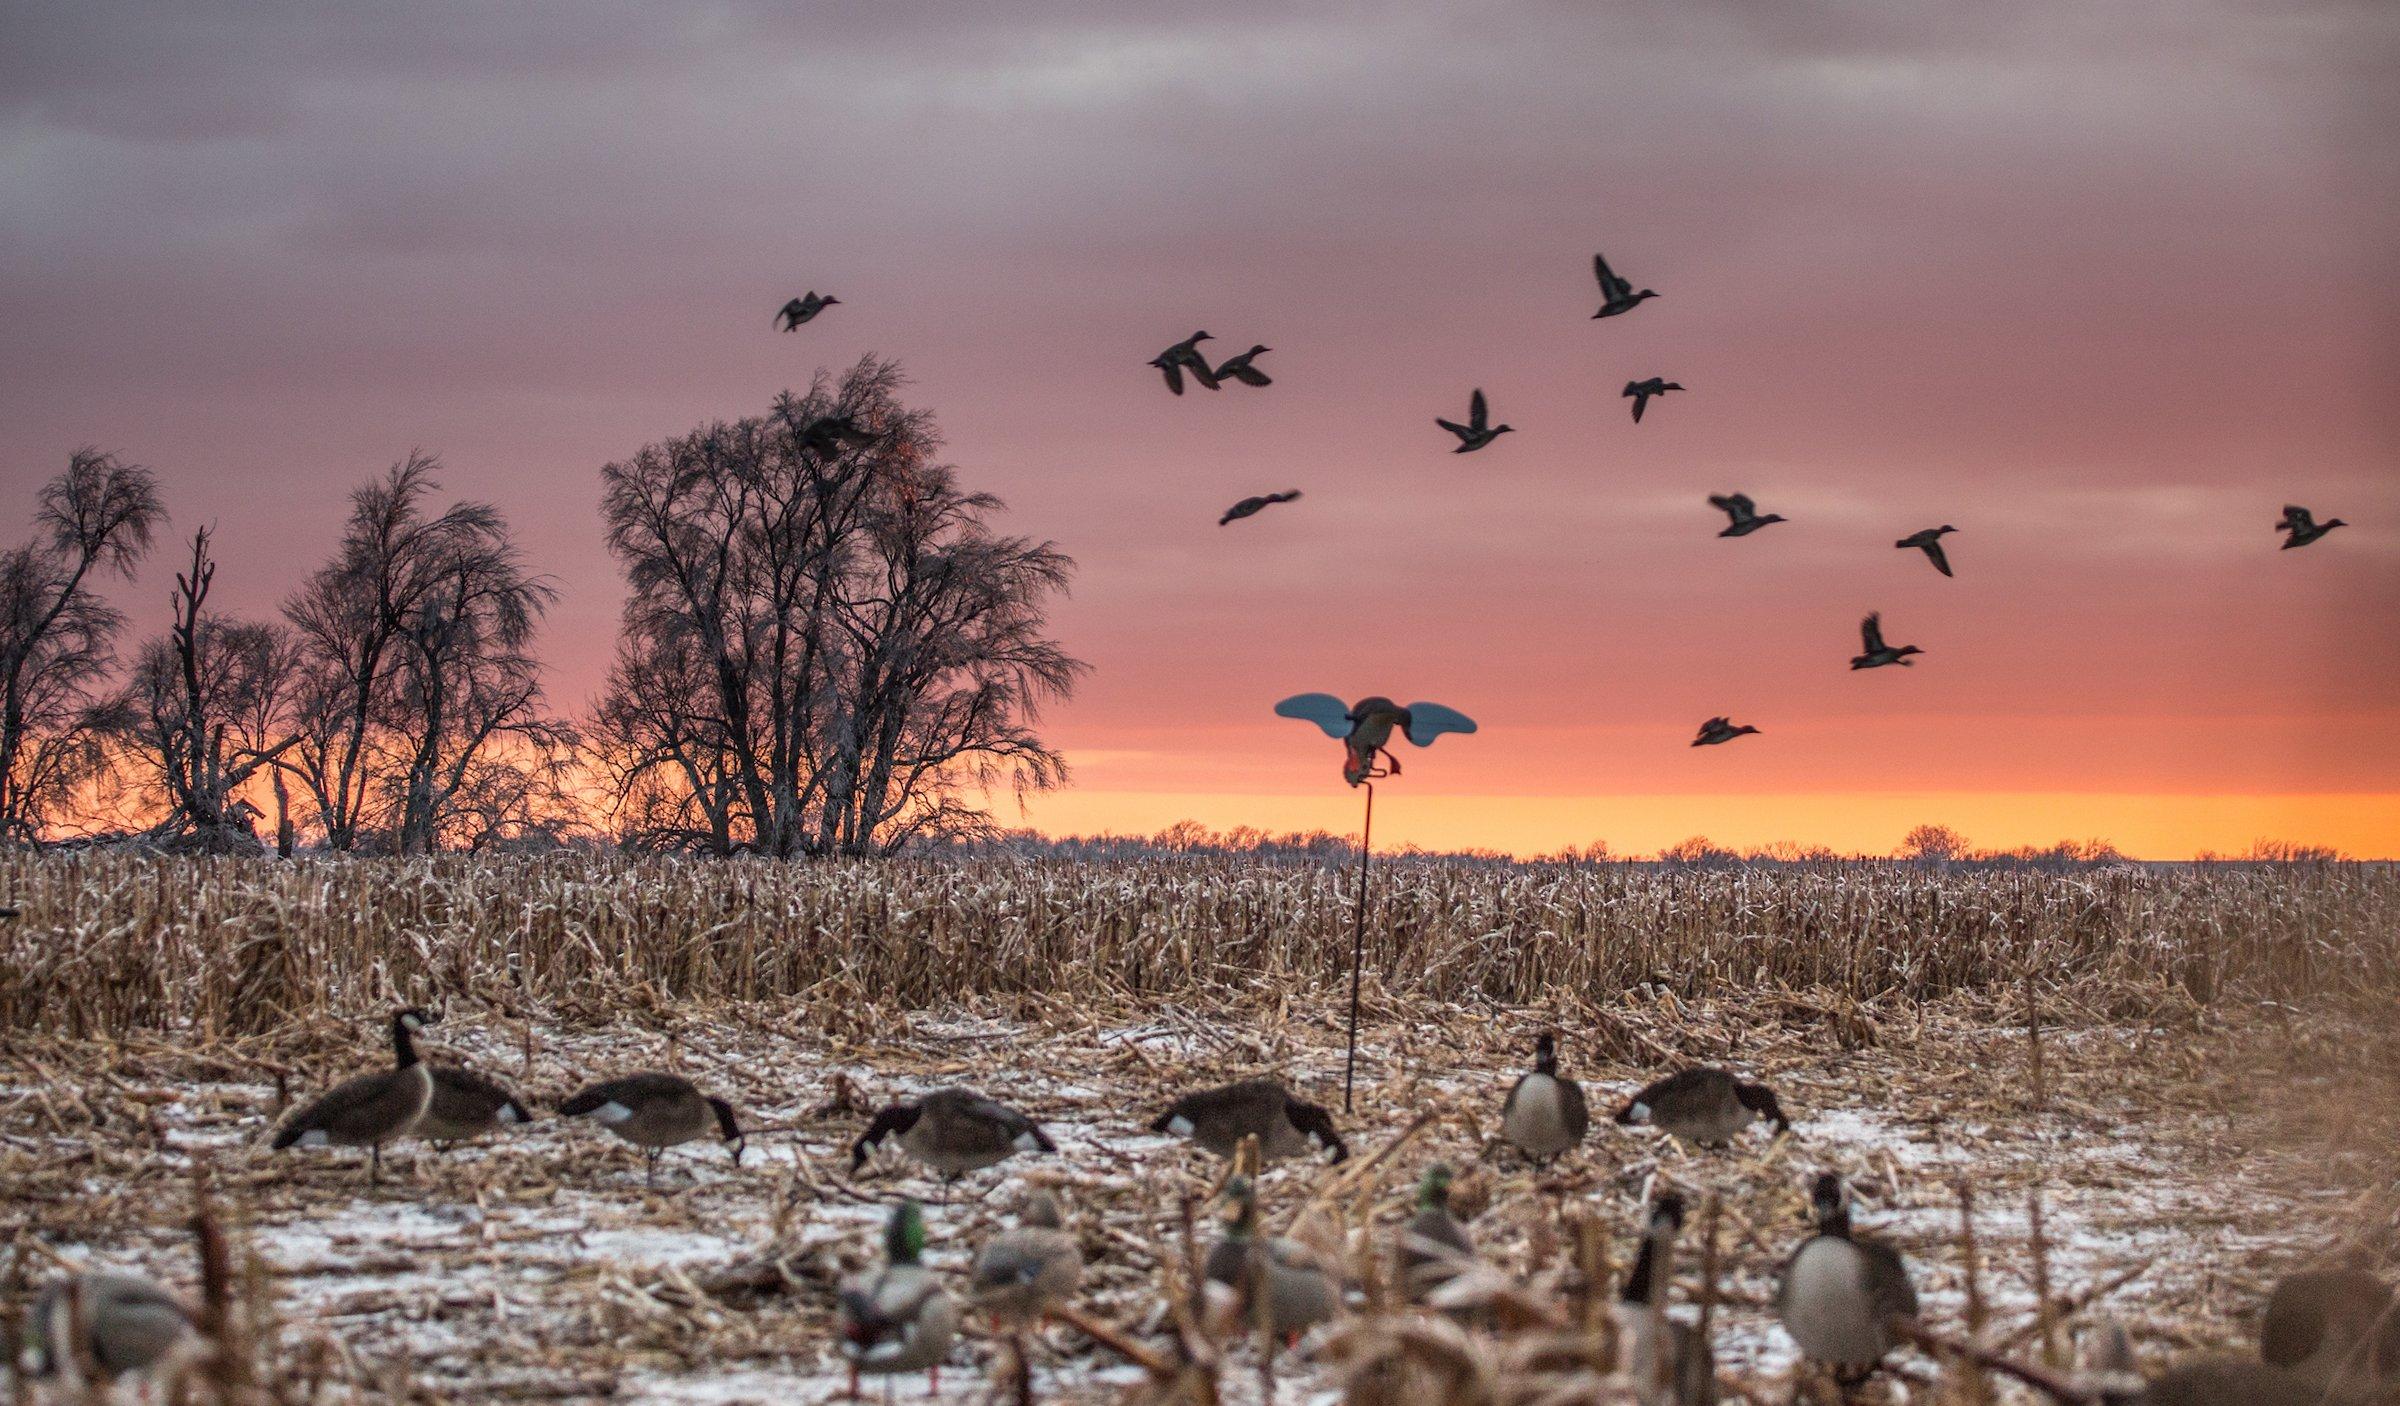 Agricultural fields often provide great opportunities to score ducks and geese during the same hunt. Photo © Tom Rassuchine/Banded